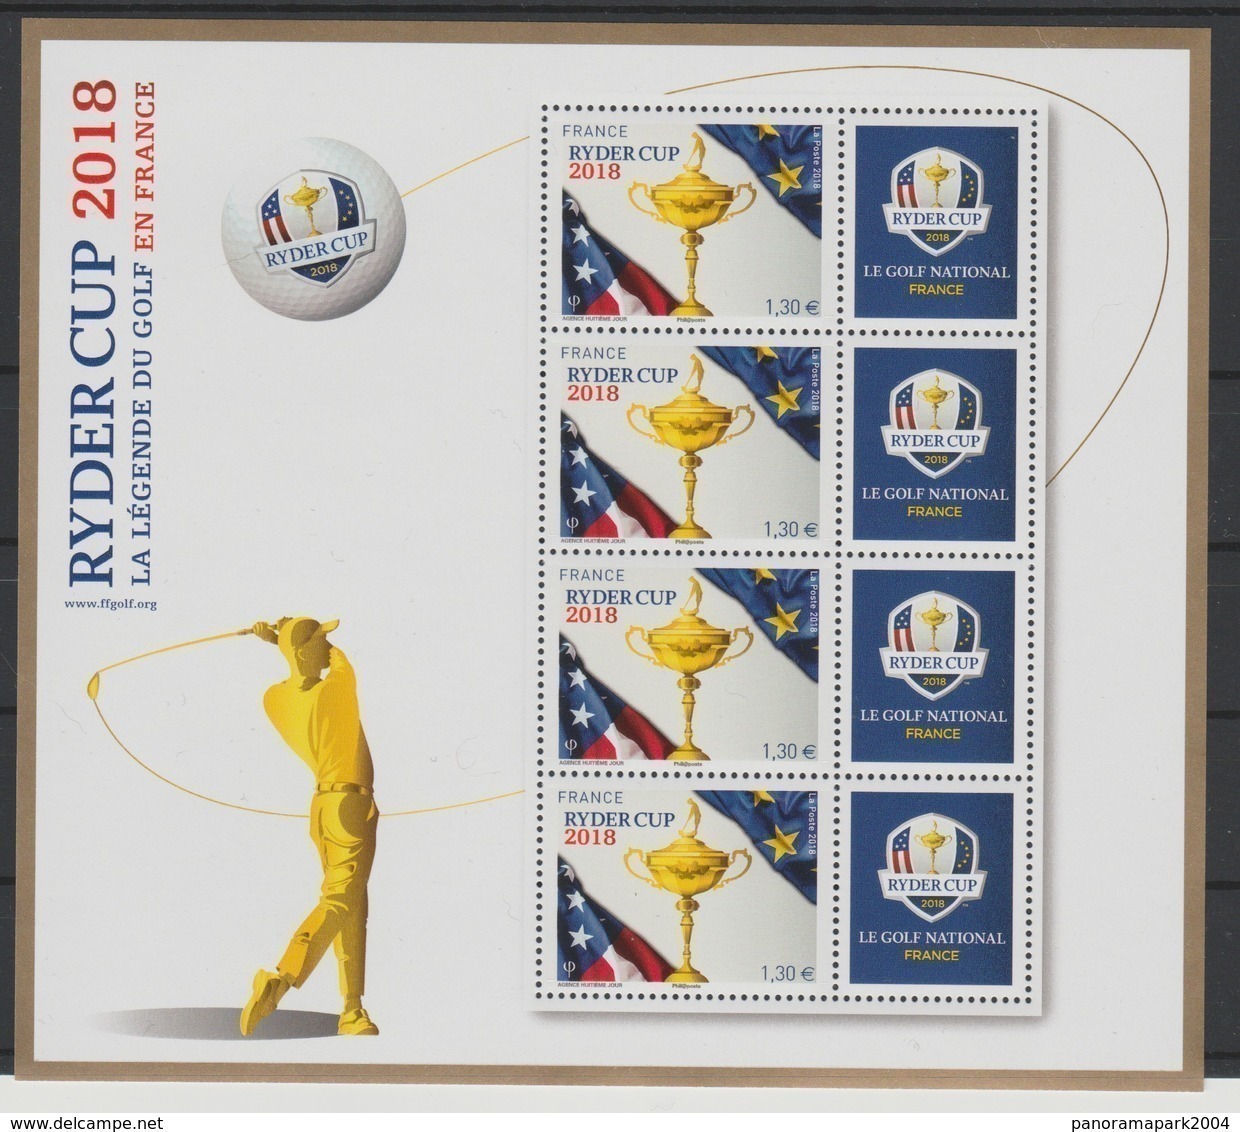 France 2018 - BF YT N°142 Mini-feuillet Bloc 4 Timbres Ryder Cup Golf LUXE MNH RARE ! Tirage 30 000 - Neufs